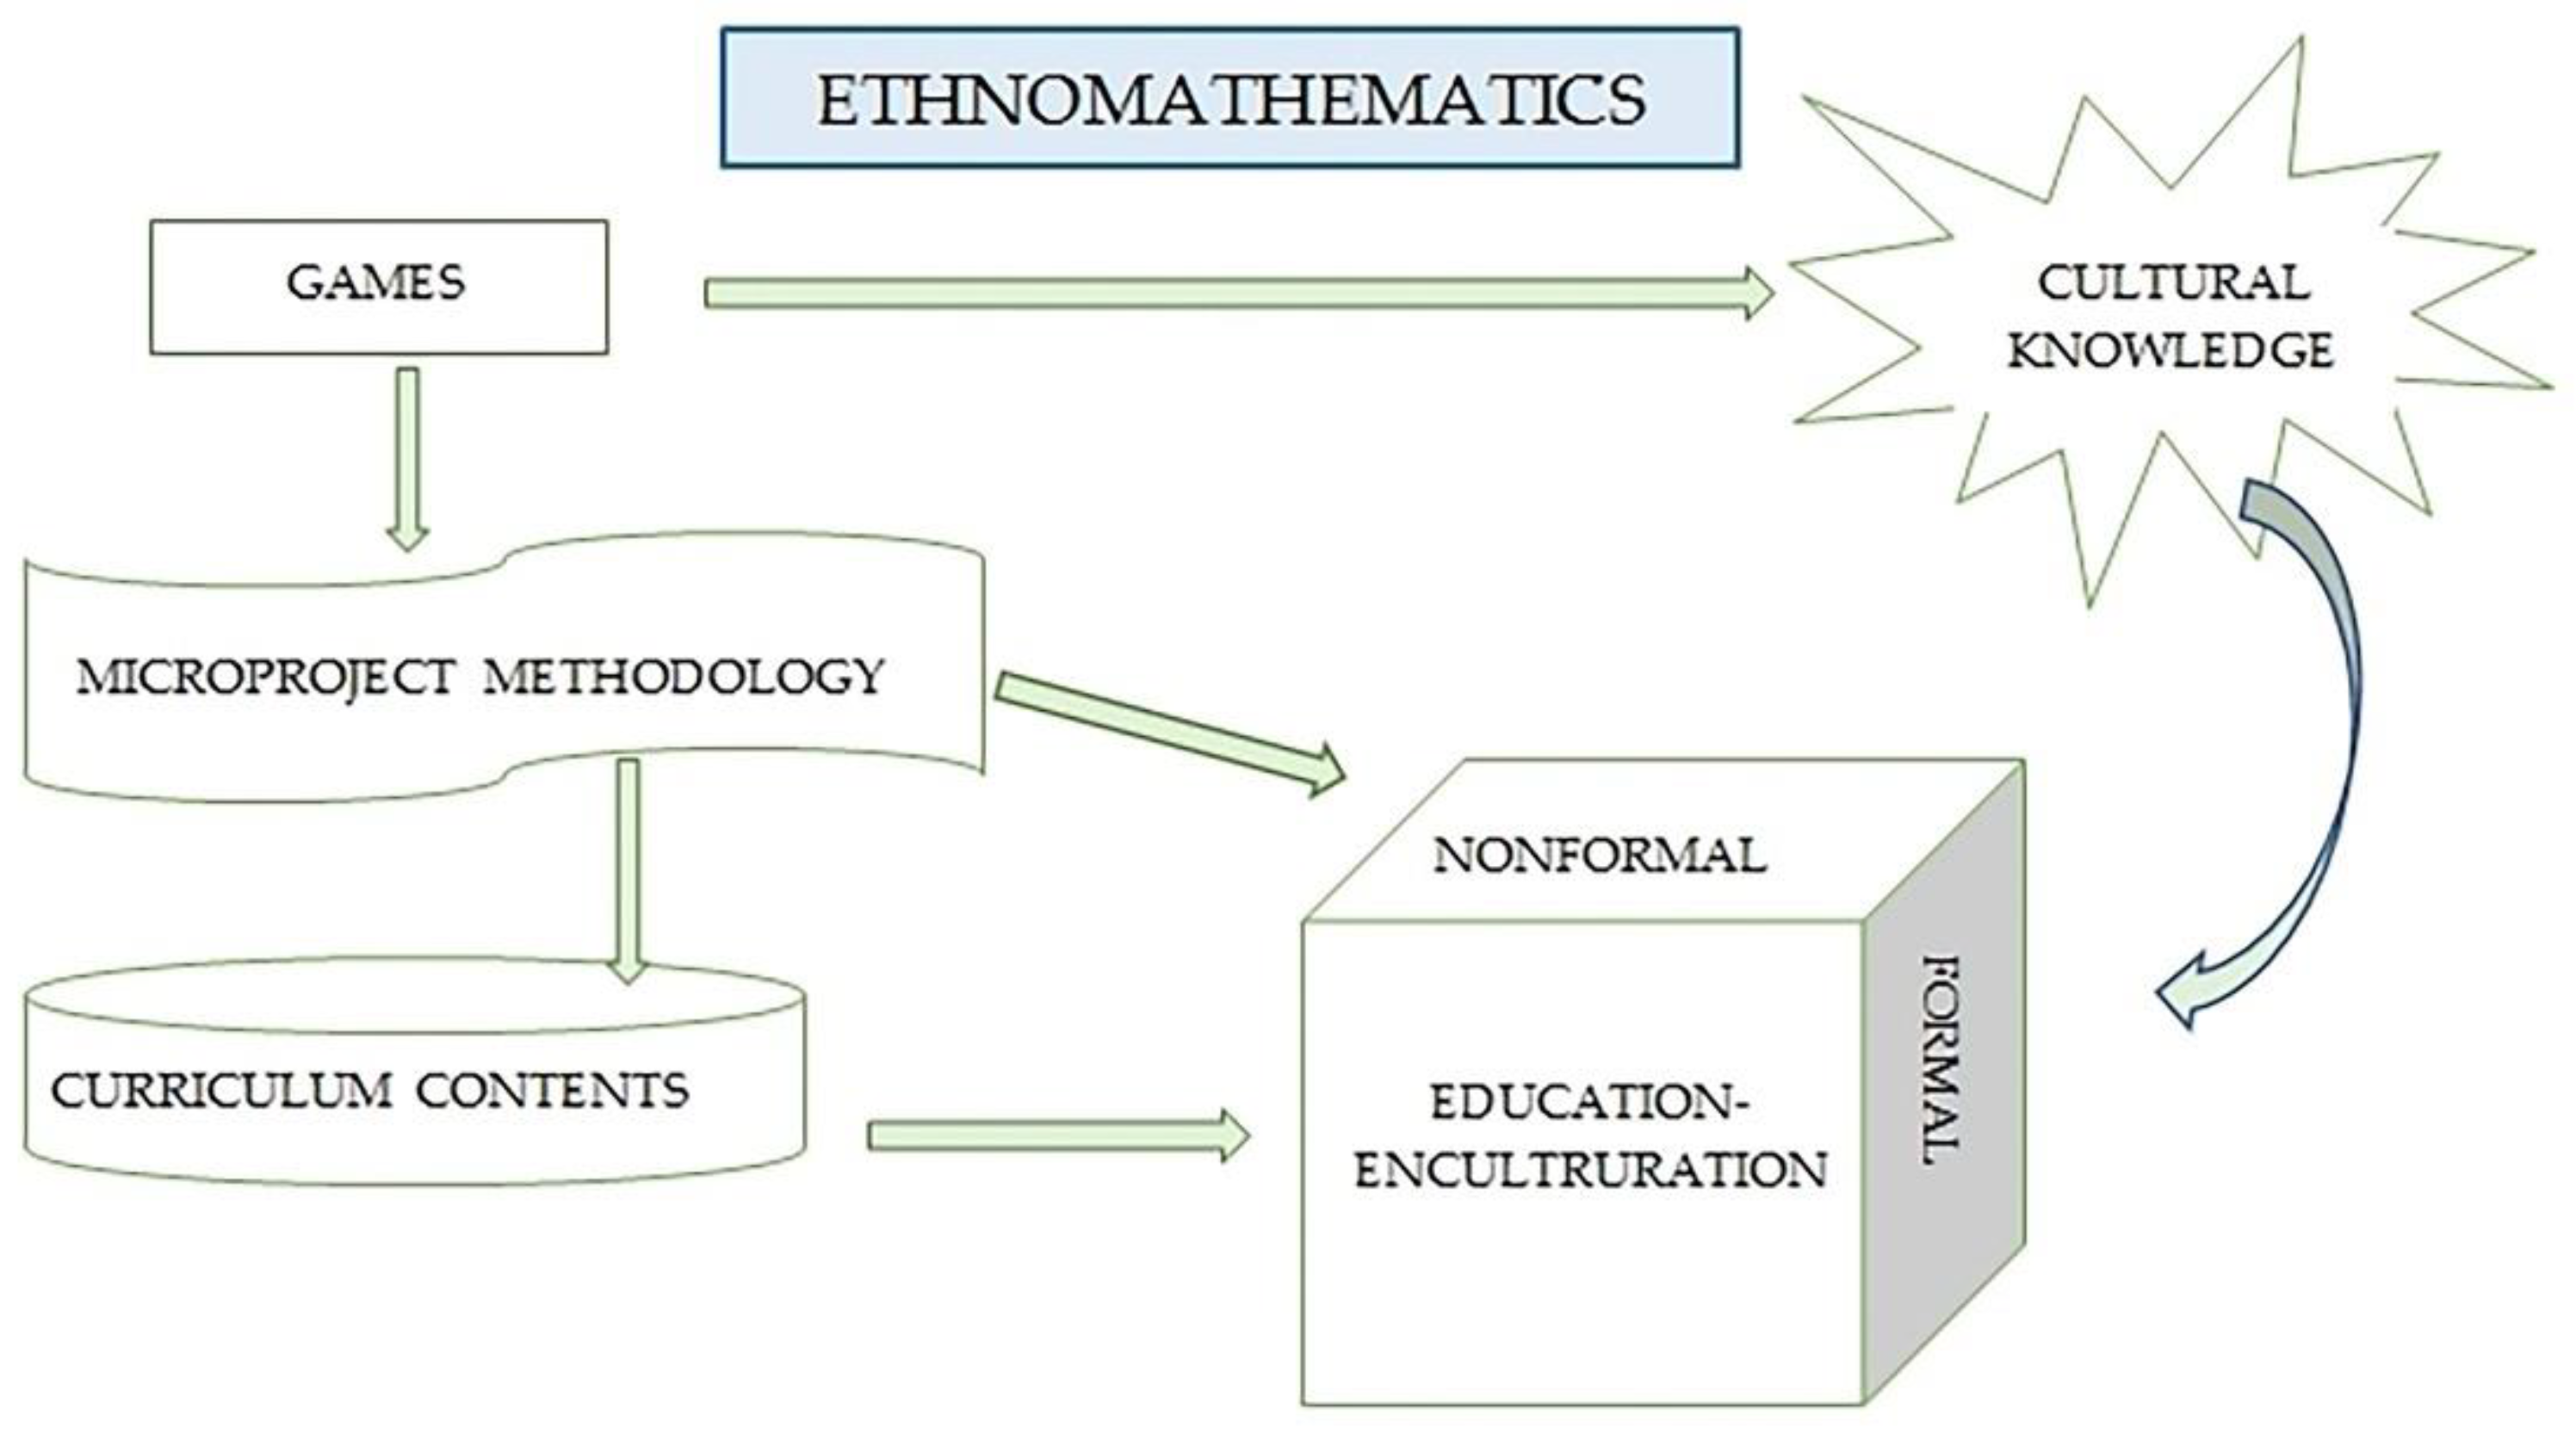 PDF) Ethnomathematics exploration at the Chinese Wall and its relation to  the concept of geometry